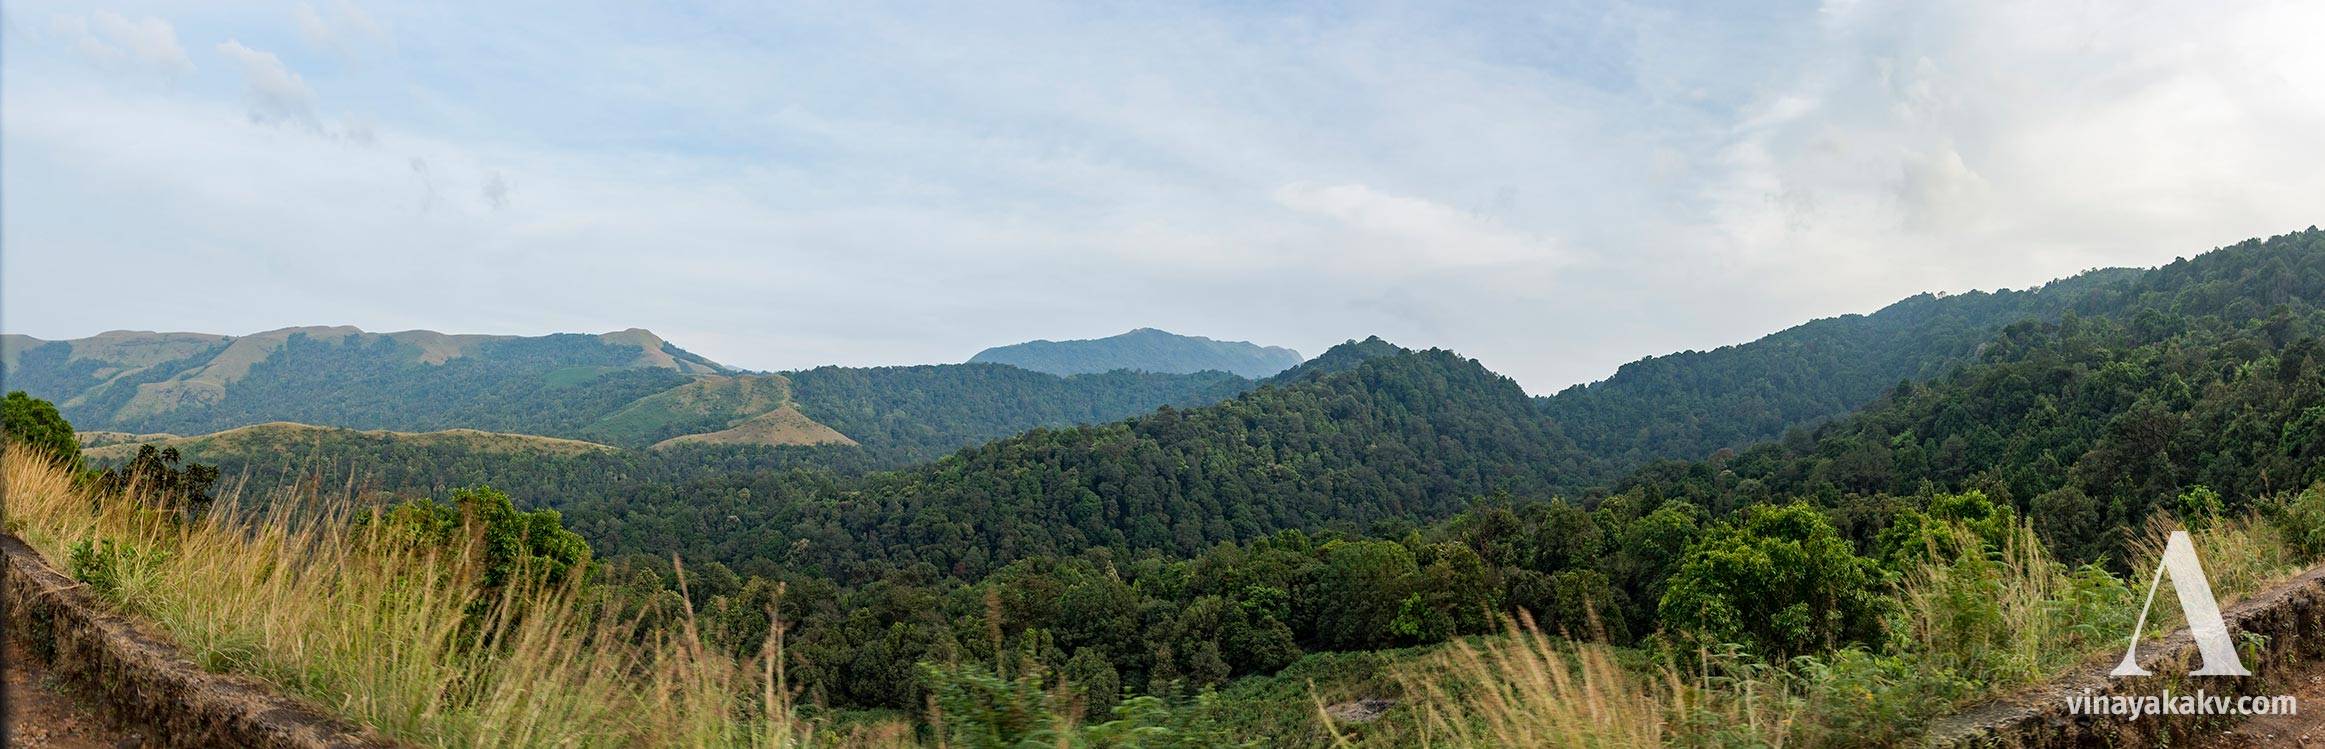 Various ecosystems of the Kuduremukha National Park summarized in one image. From the right side to the middle, tropical rainforests; at the left, the "shola" mountains.